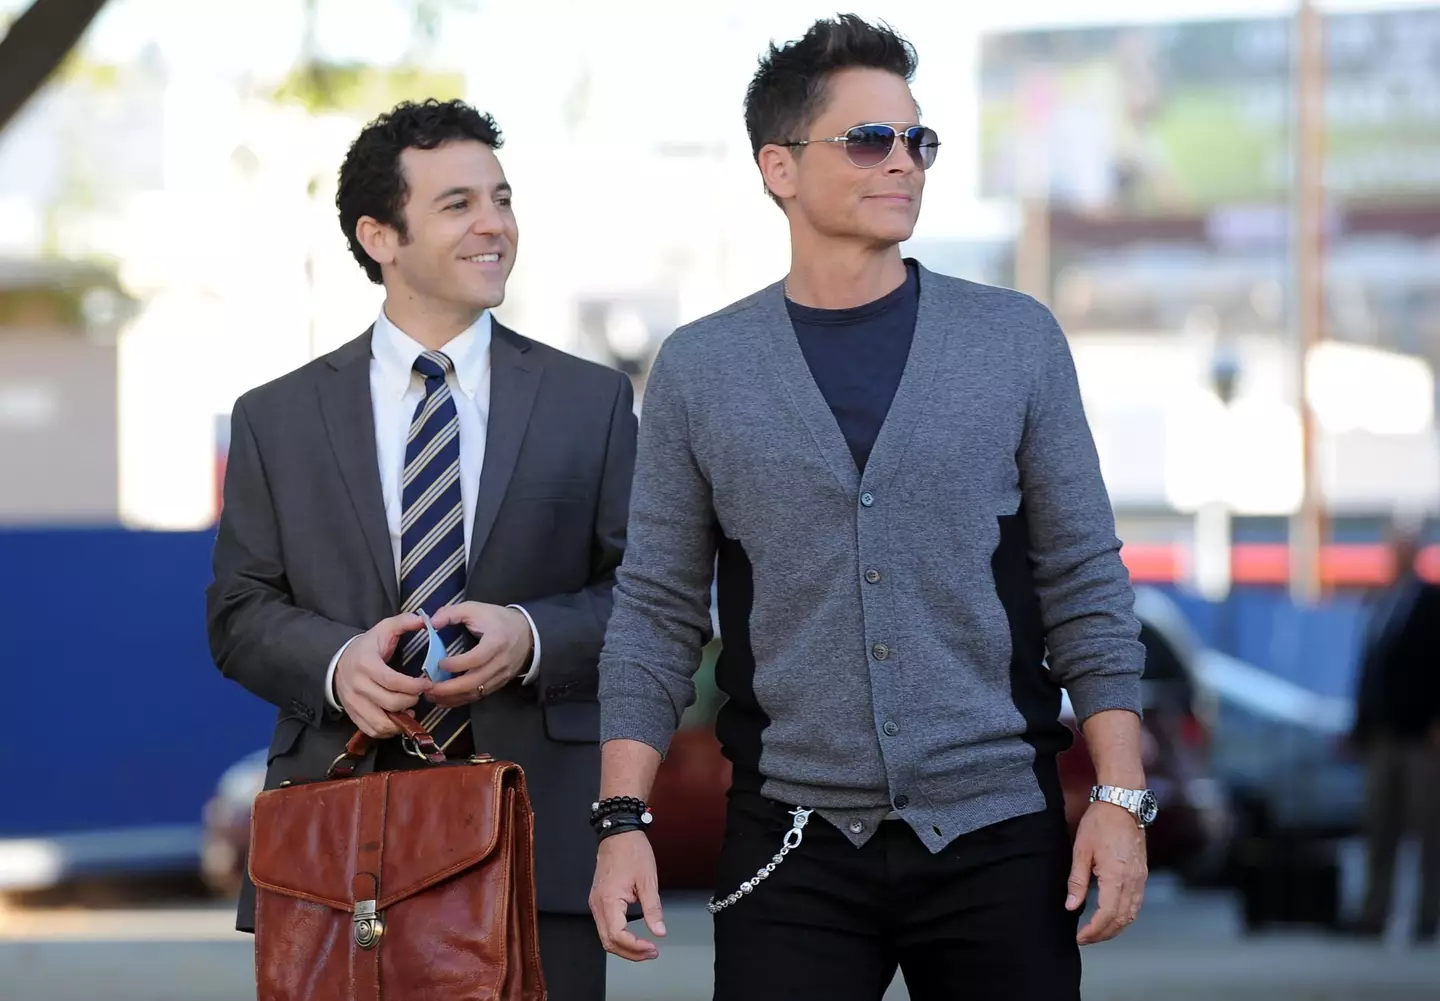 Similar claims were made while Savage starred in The Grinder alongside Rob Lowe.